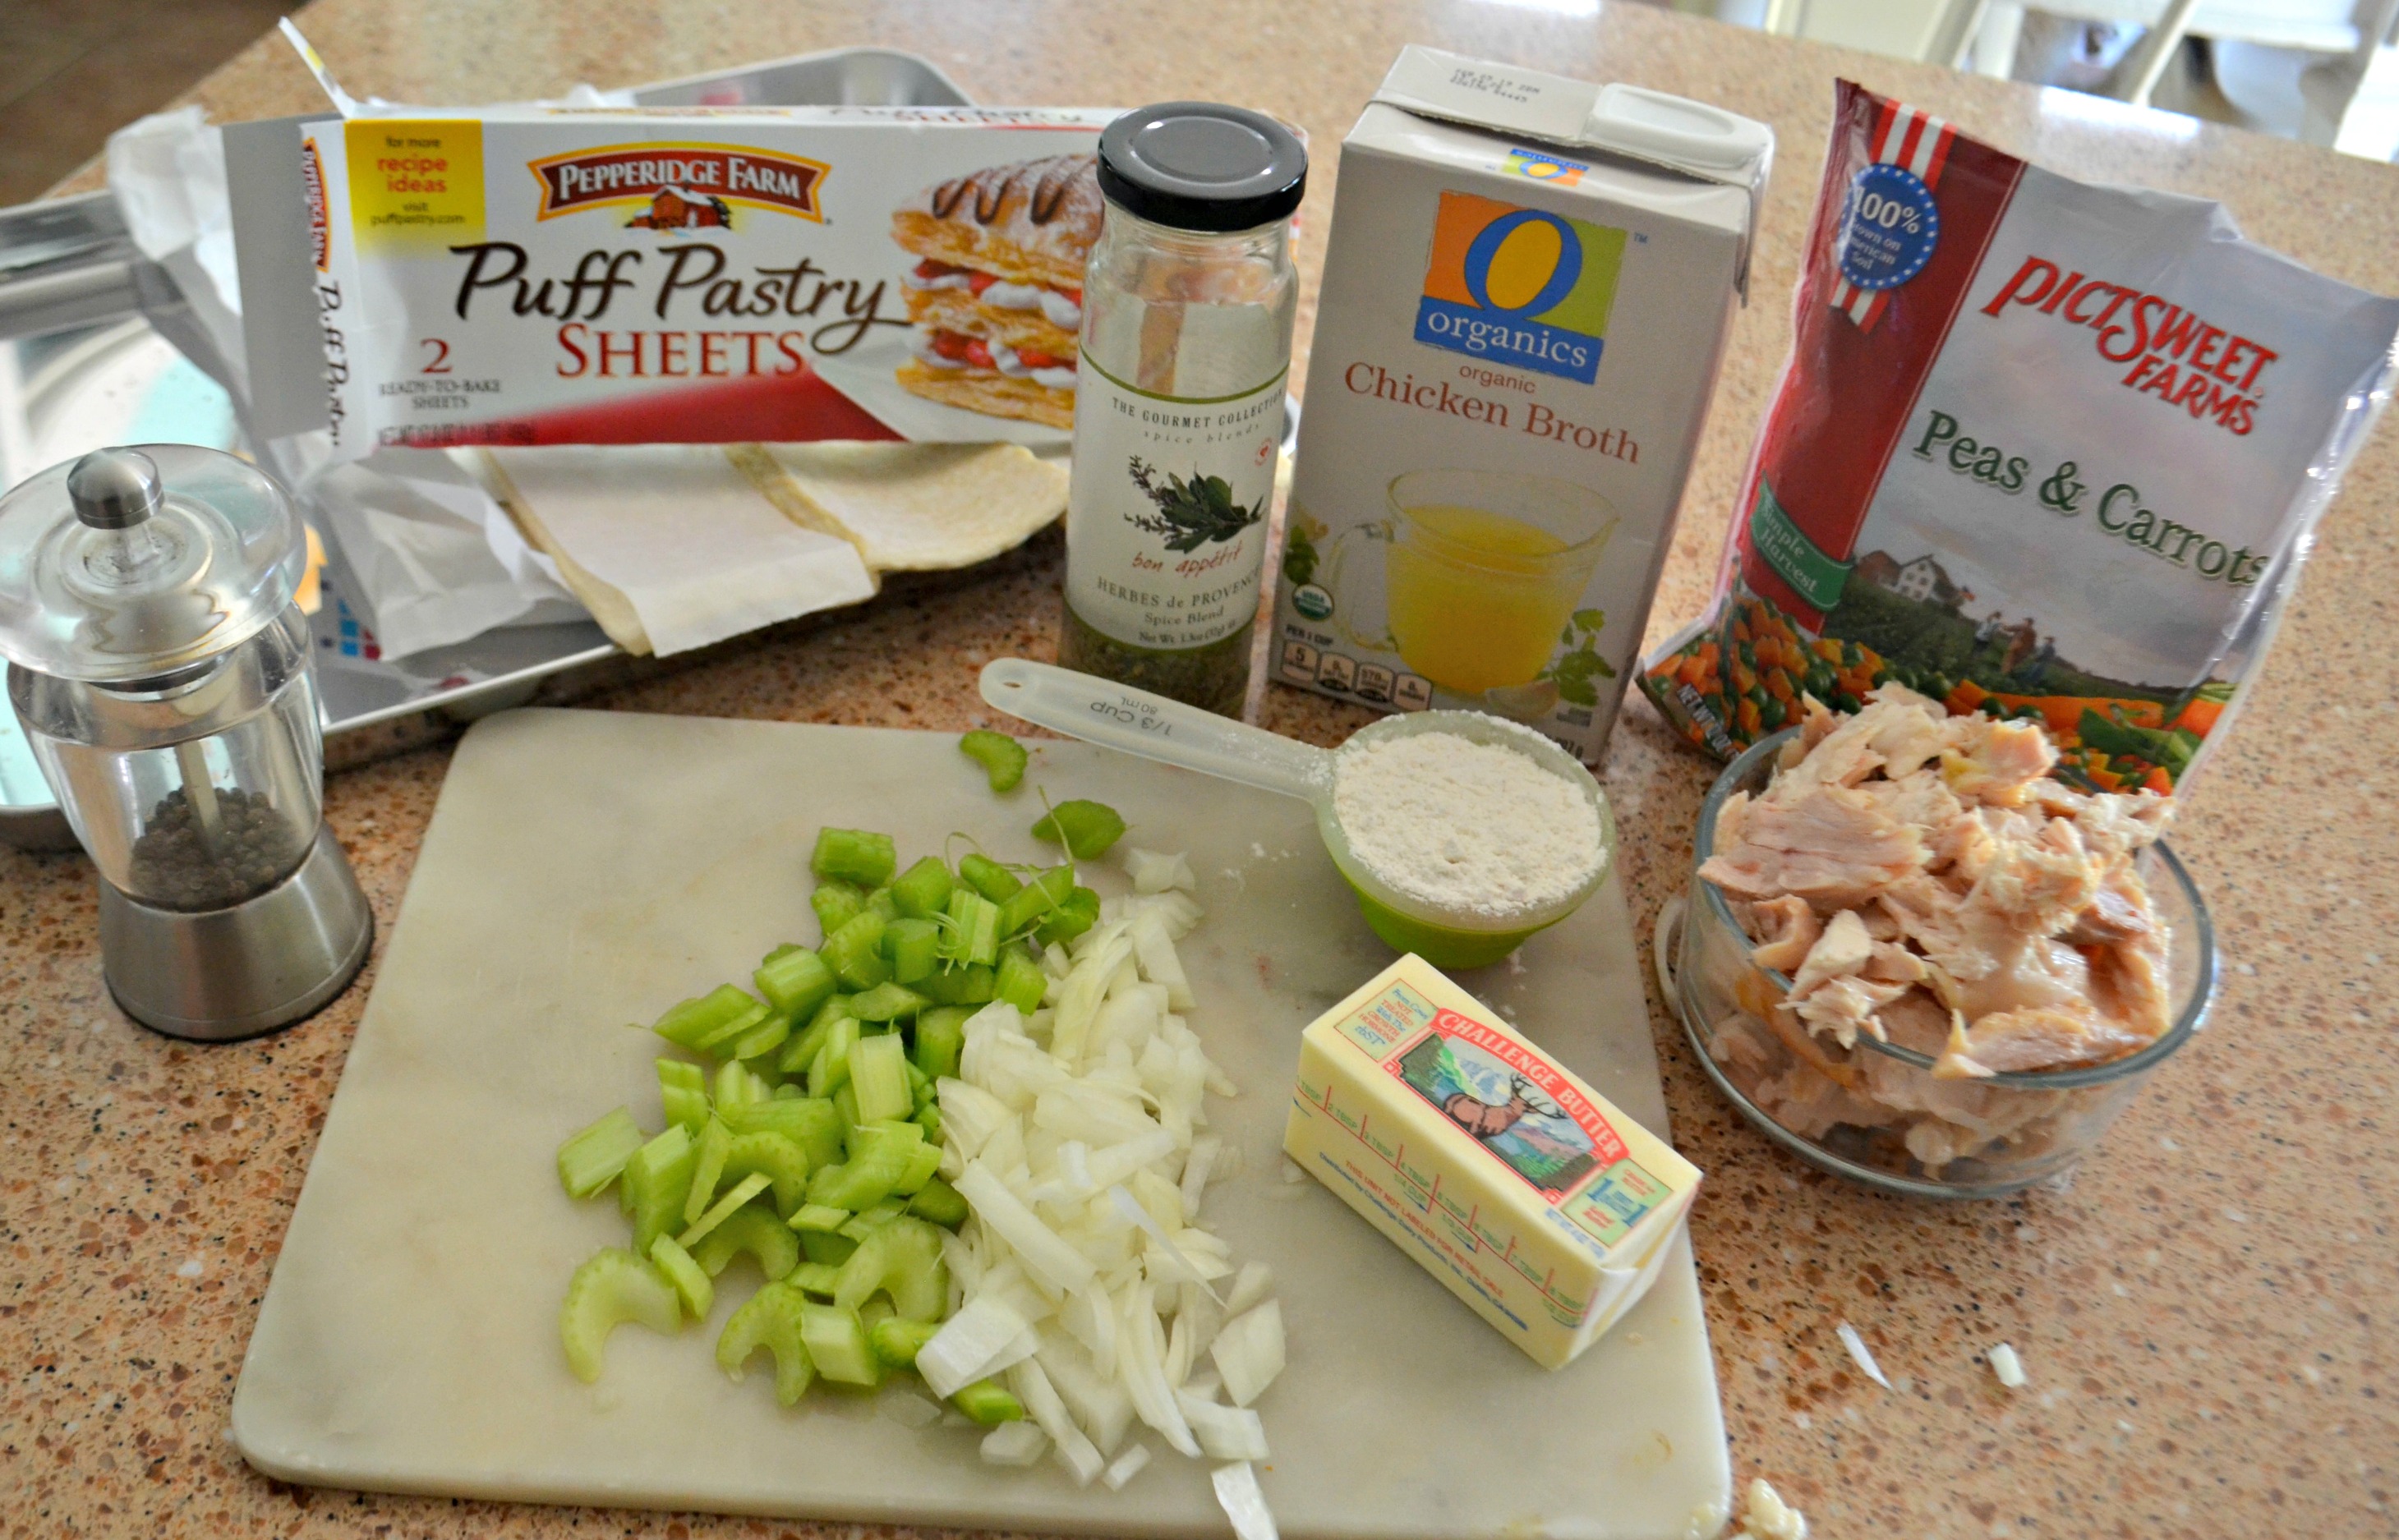 Sheet Pan Chicken Pot Pie - the ingredients on the counter